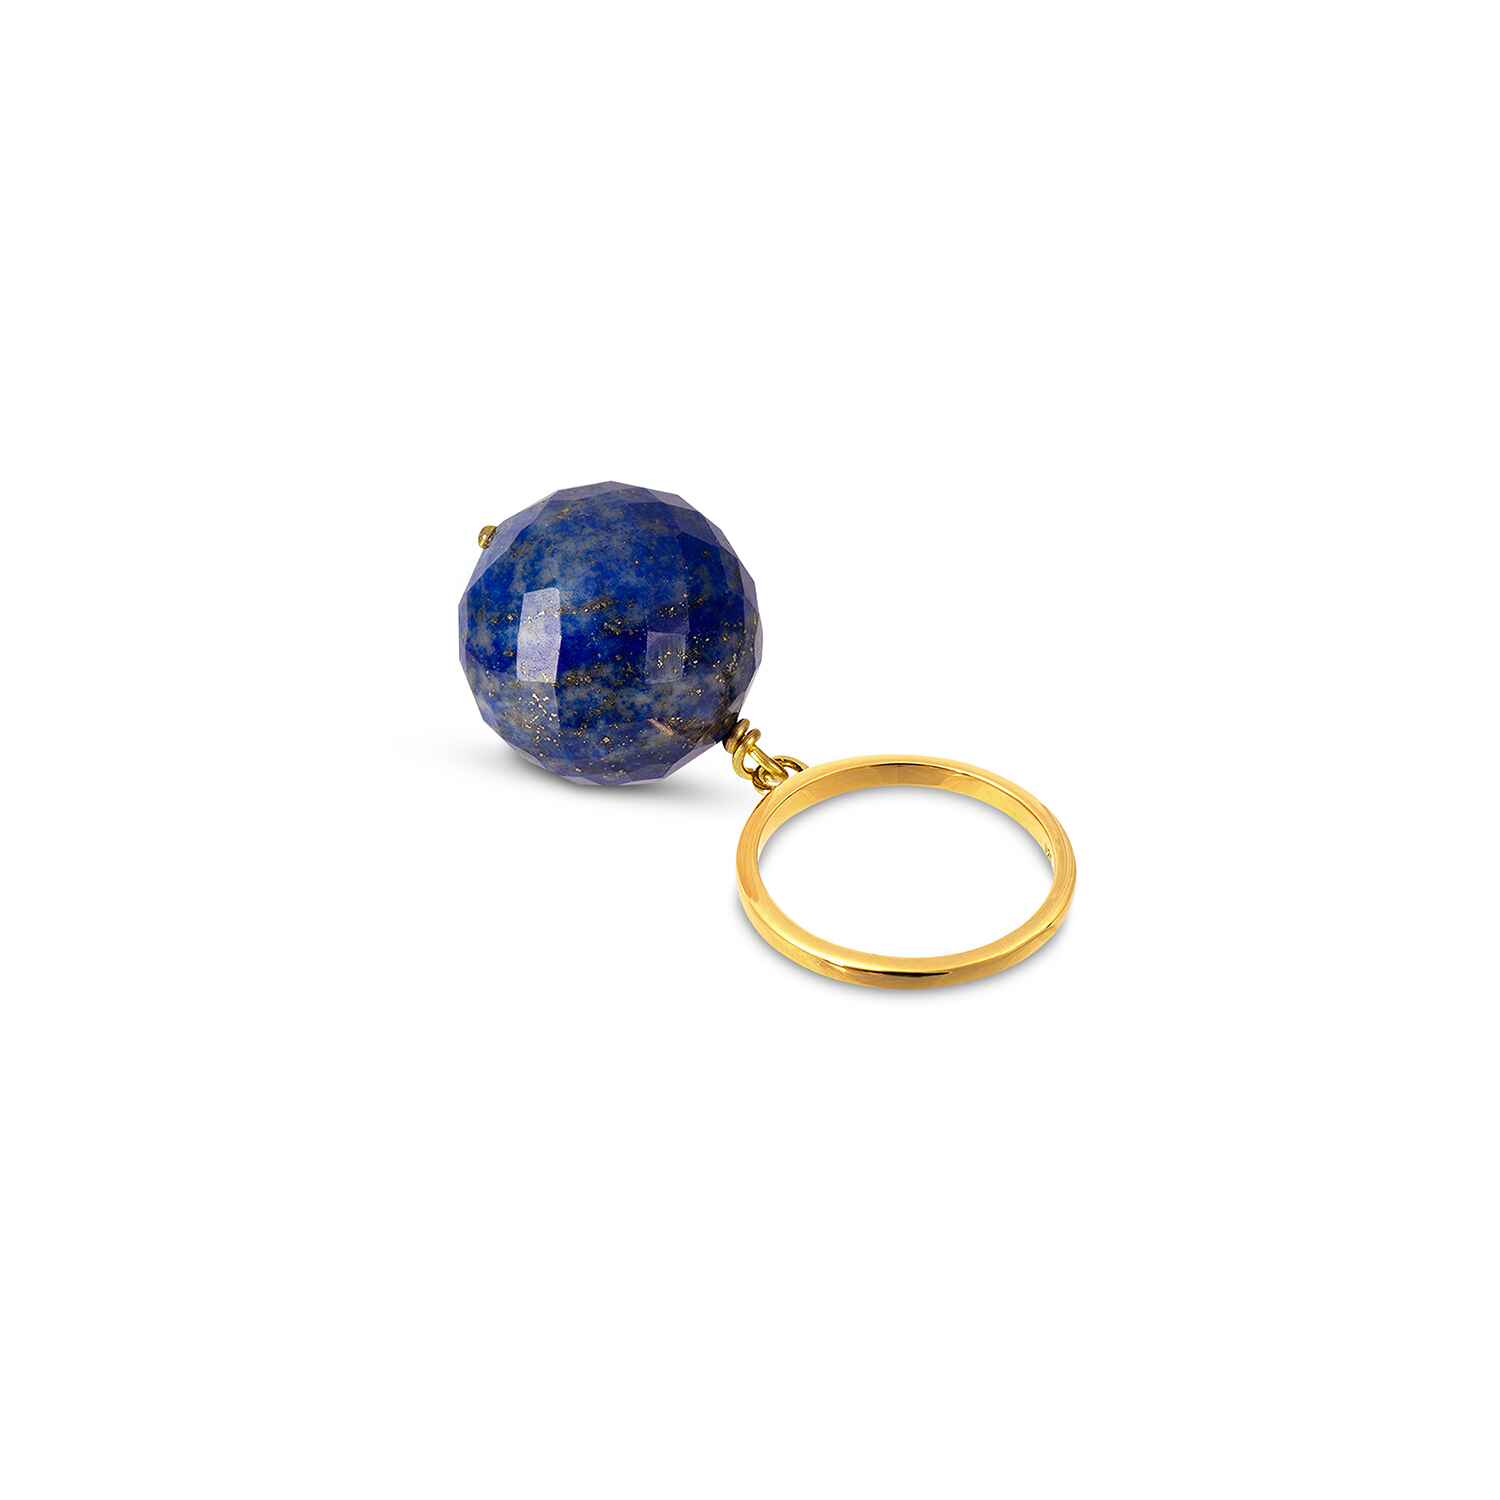 The Bubble Lapis Lazuli Ring features a deep celestial blue gemstone with gold chips, attached to a size adjustable ring band. This allows the vintage gemstone to move freely around your finger making this a unique ring.